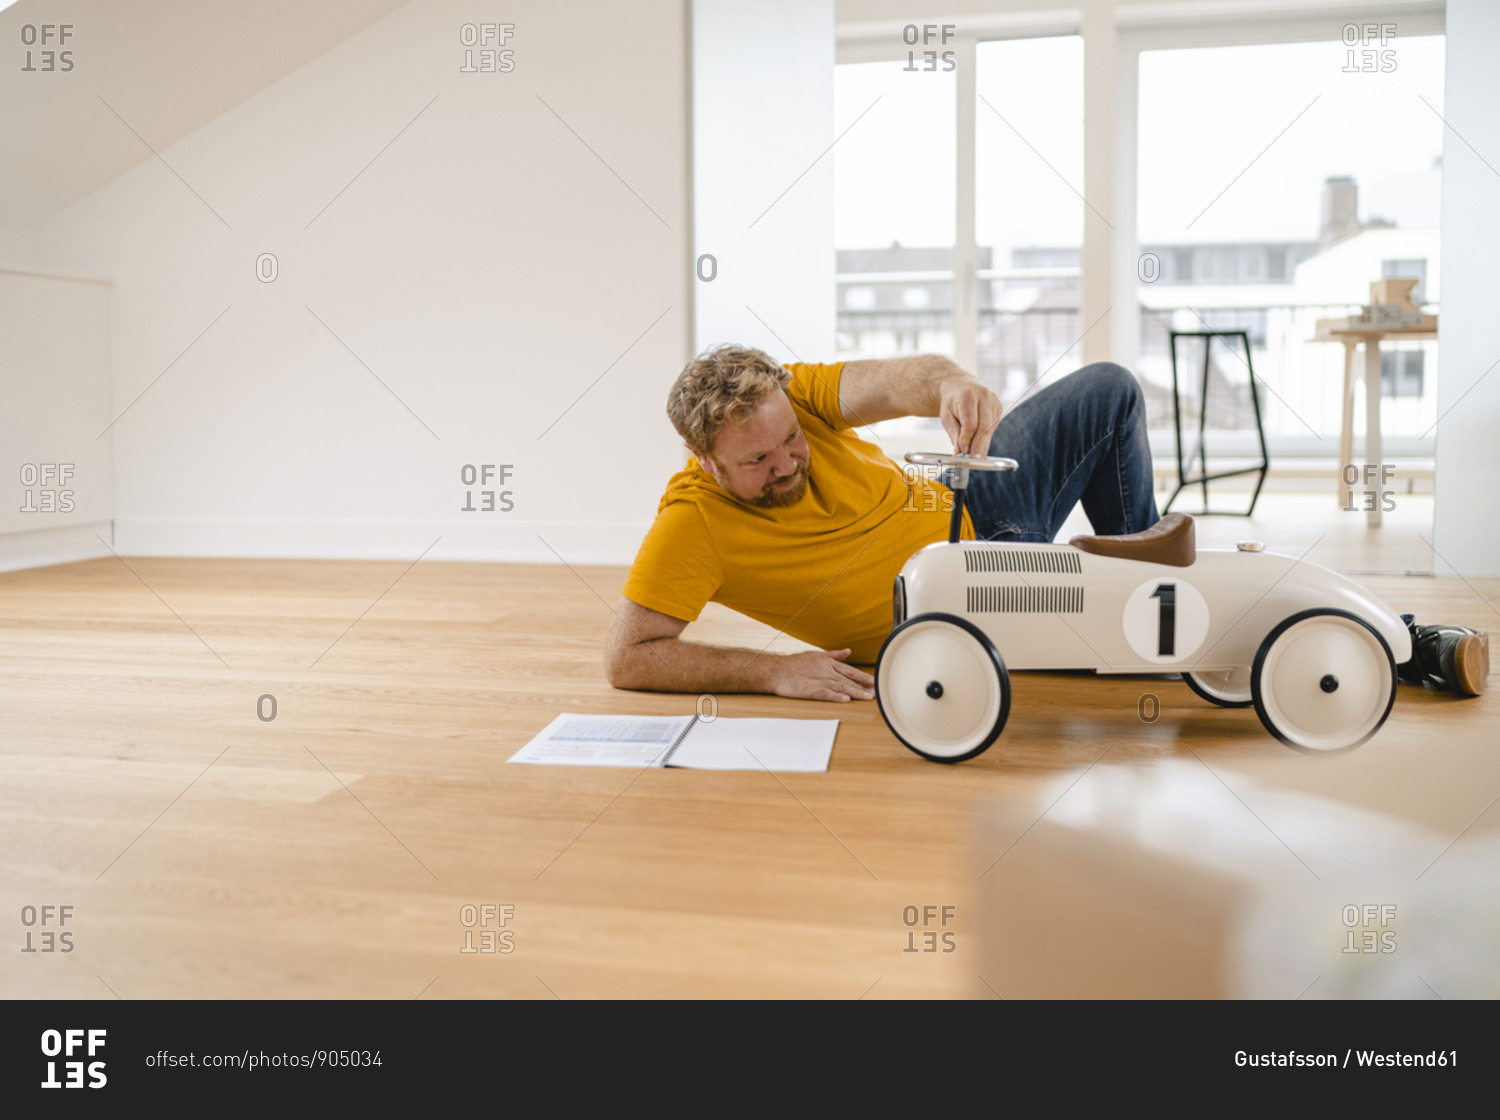 Man playing with toy car